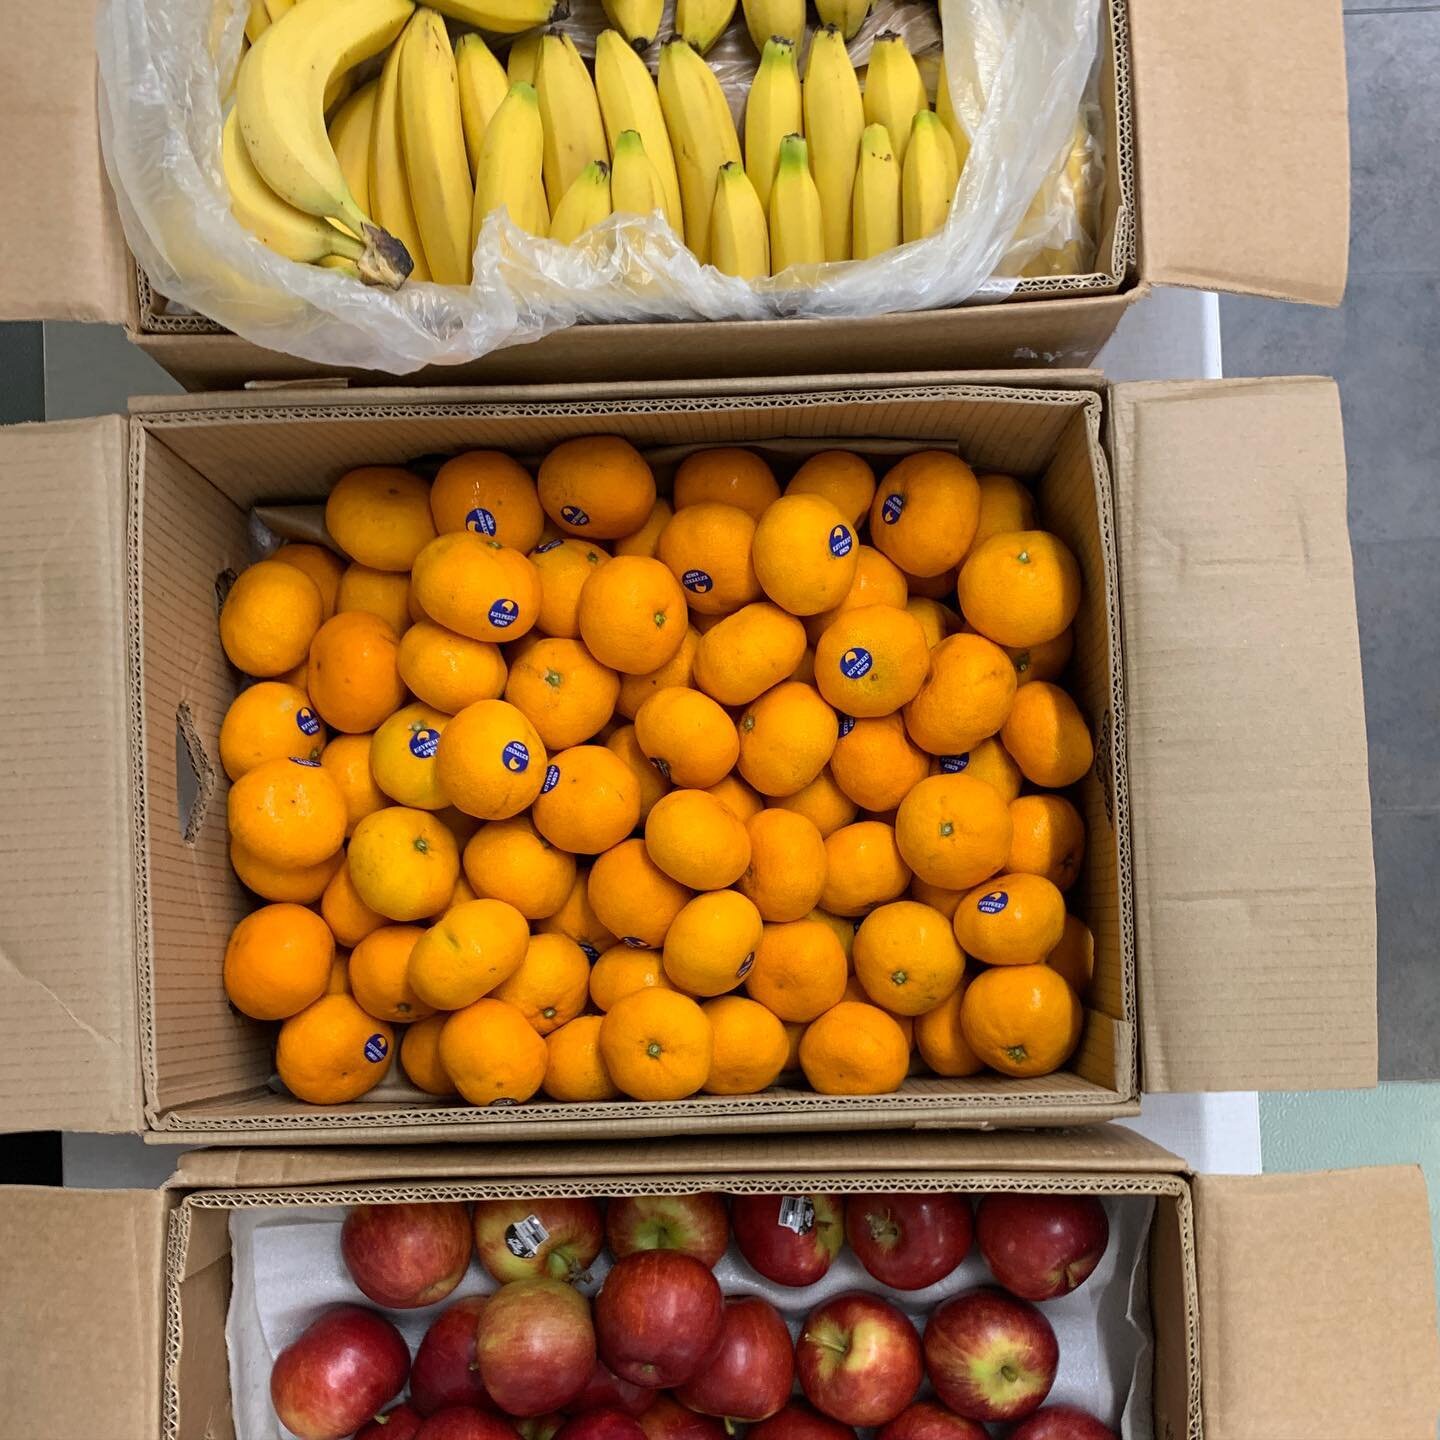 It&rsquo;s Wiki Whai Hauora! Eating well doesn&rsquo;t have to be as expensive as a smoothie bowl after your Pilates class, so we&rsquo;ve got FREE fruit (and some snacks) while they last outside the office all week! 🍎🍊🍌👀

Should go without sayin